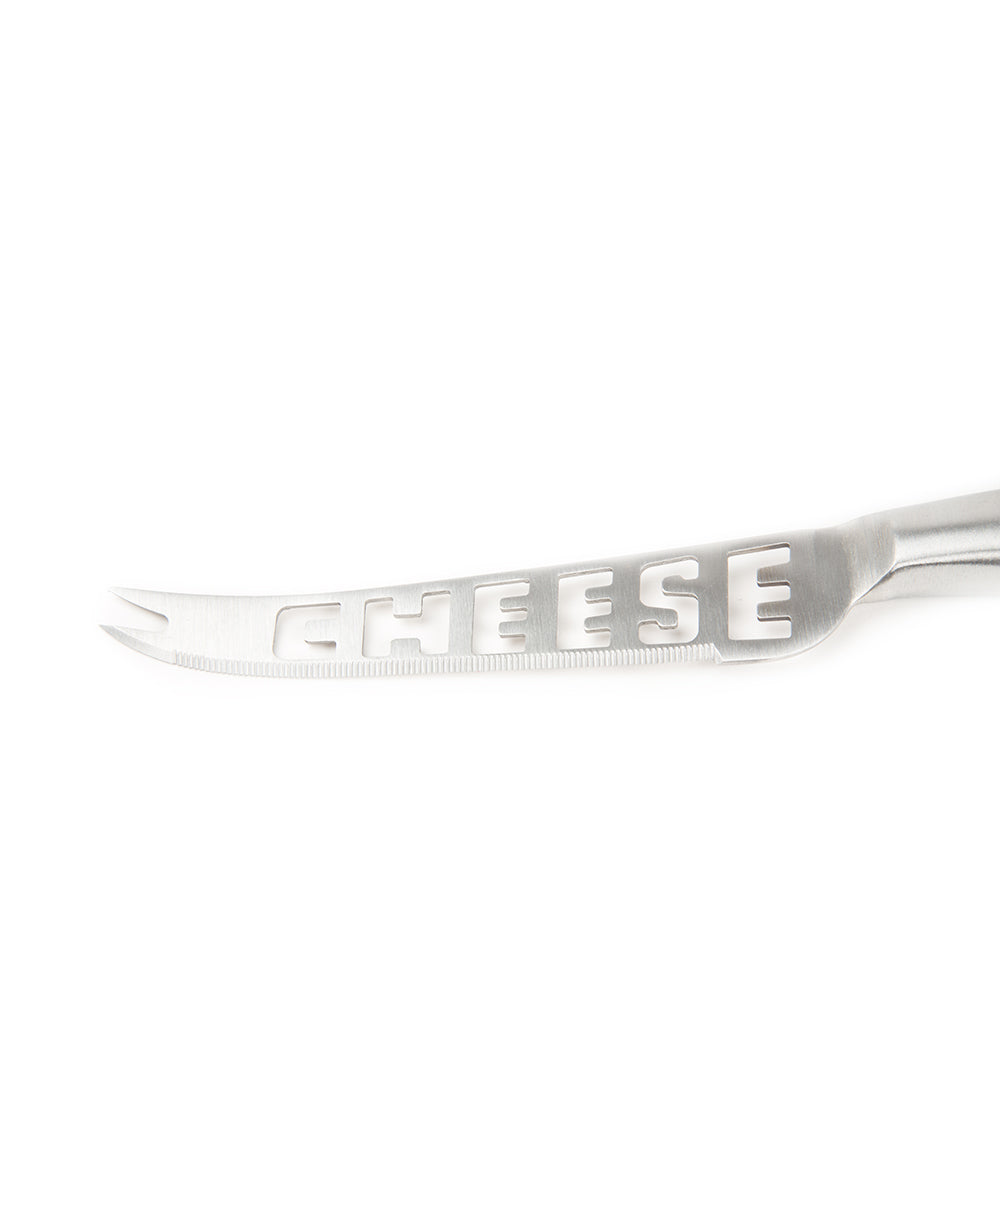 STAINLESS STEEL CHEESE KNIFE